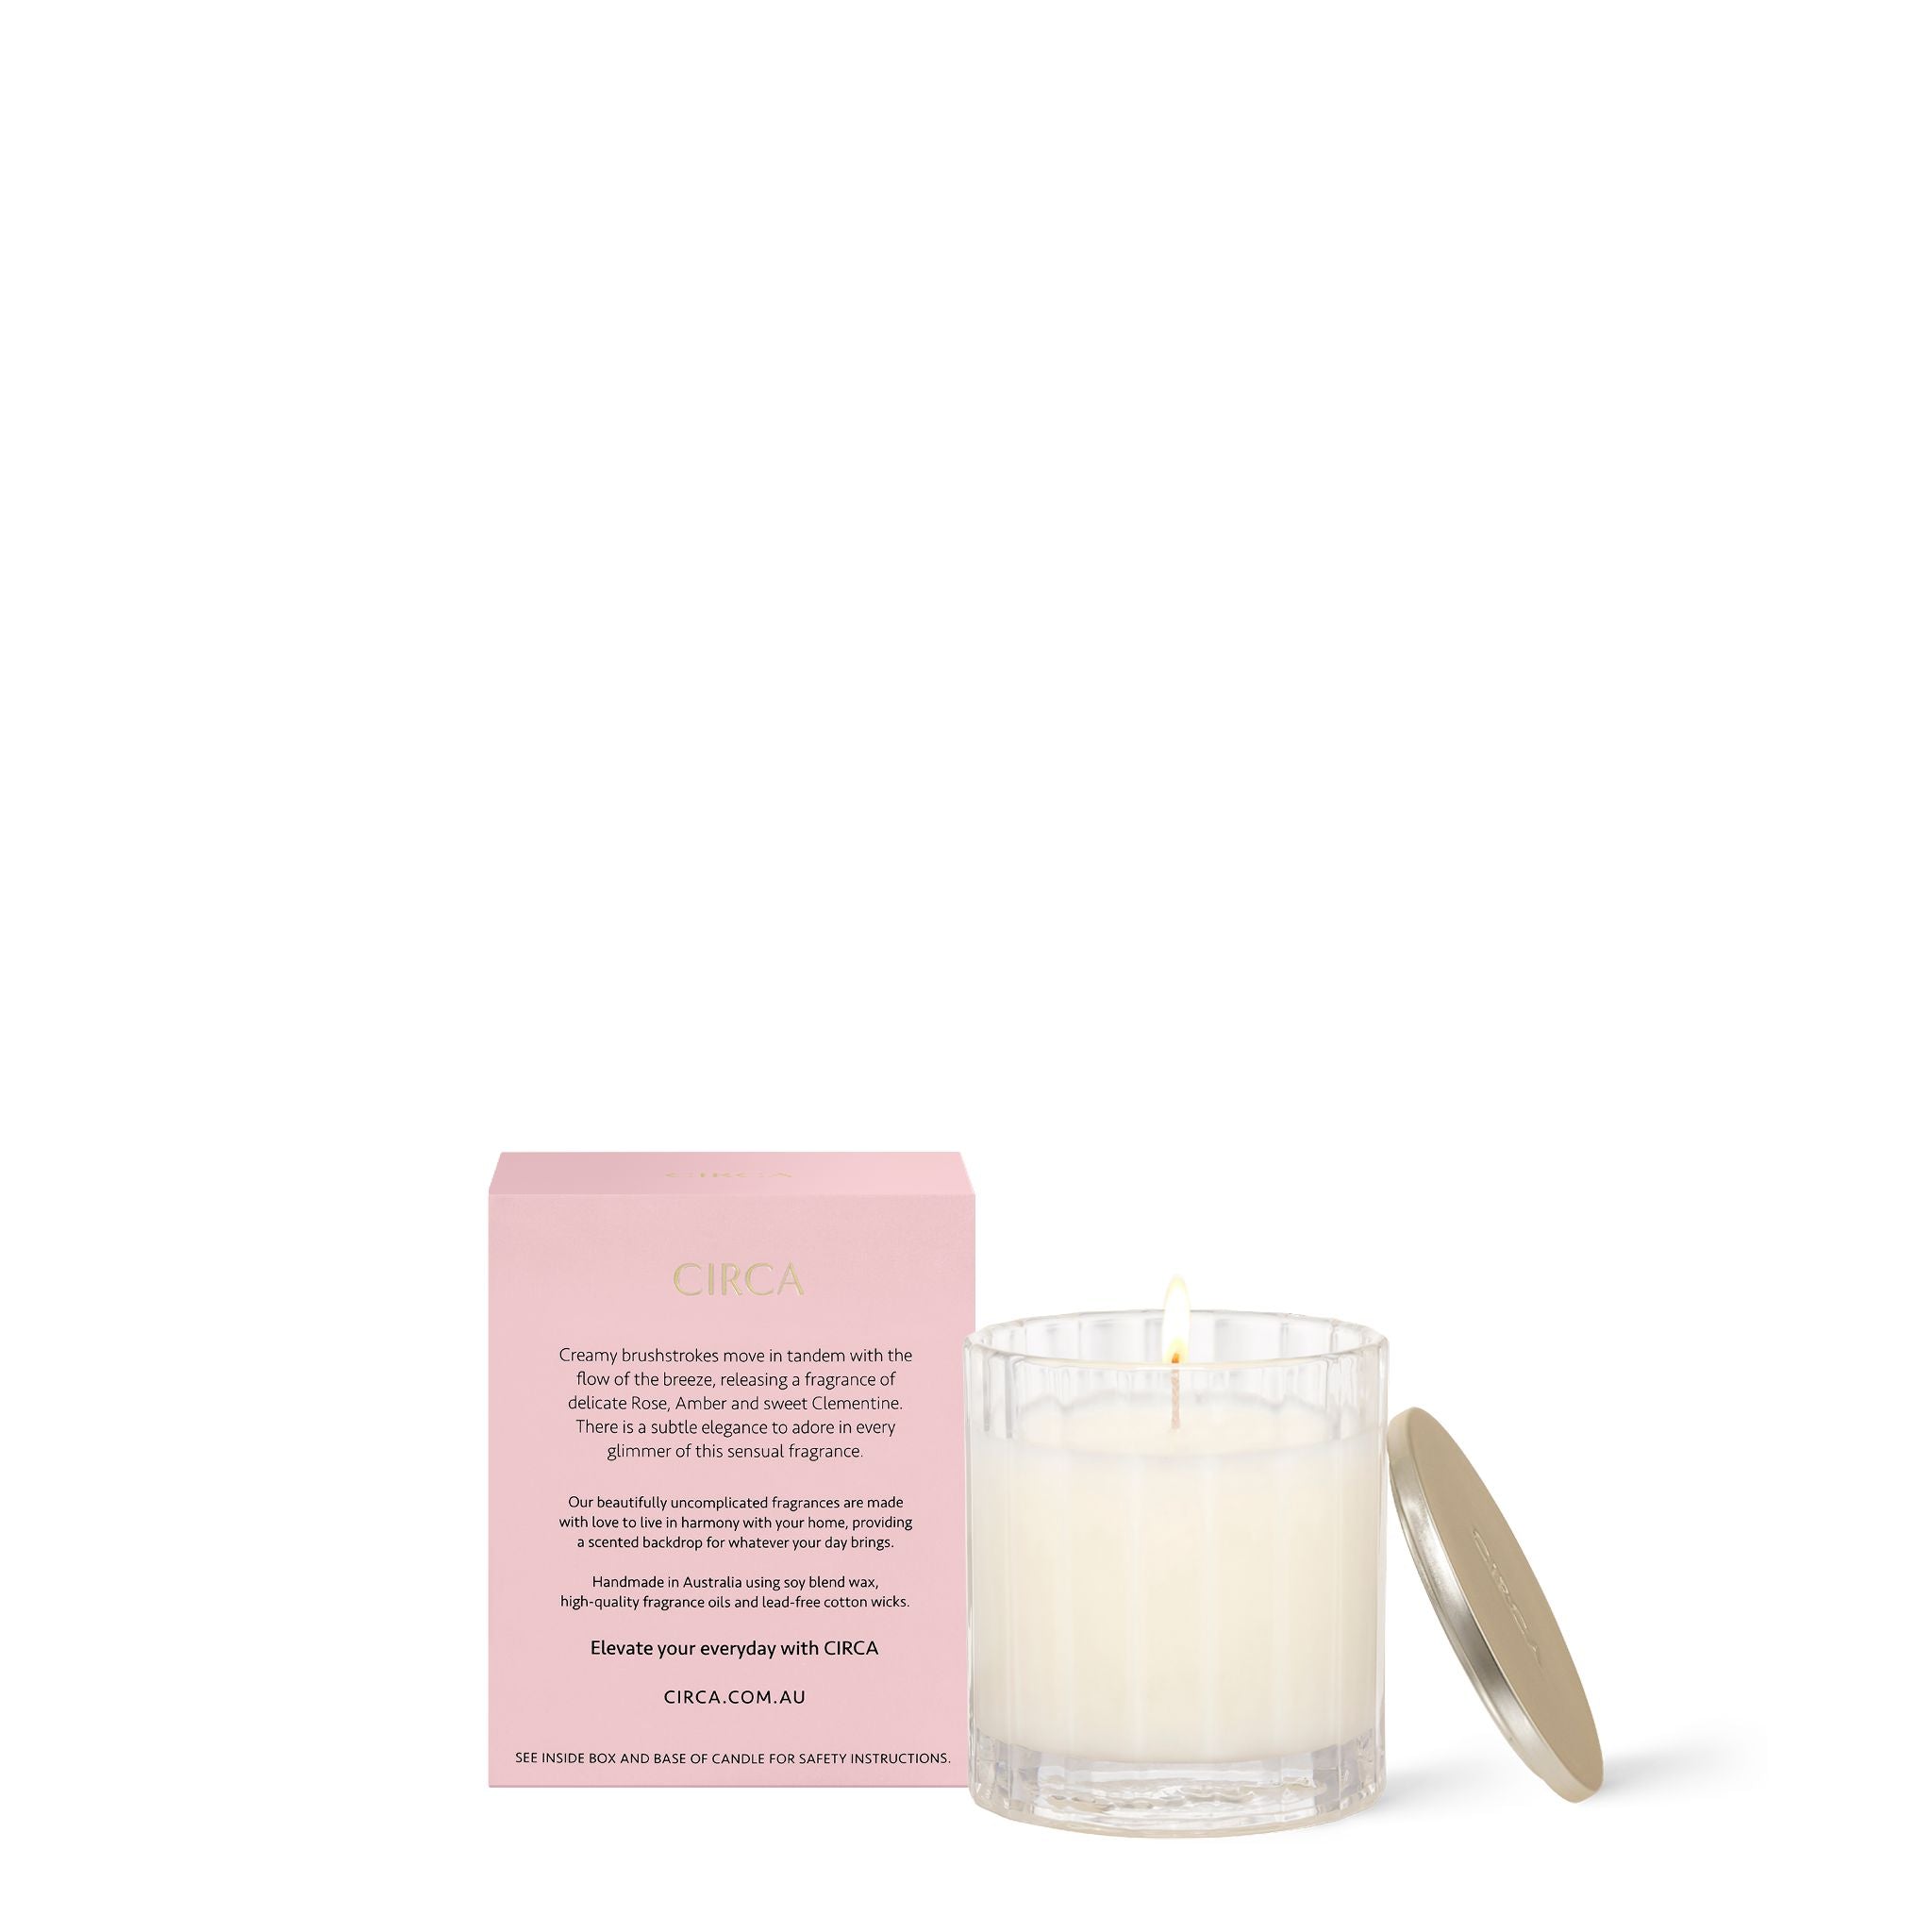 Soy Candle 60g - Rose Nectar & Clementine-Candles & Fragrance-Circa-The Bay Room